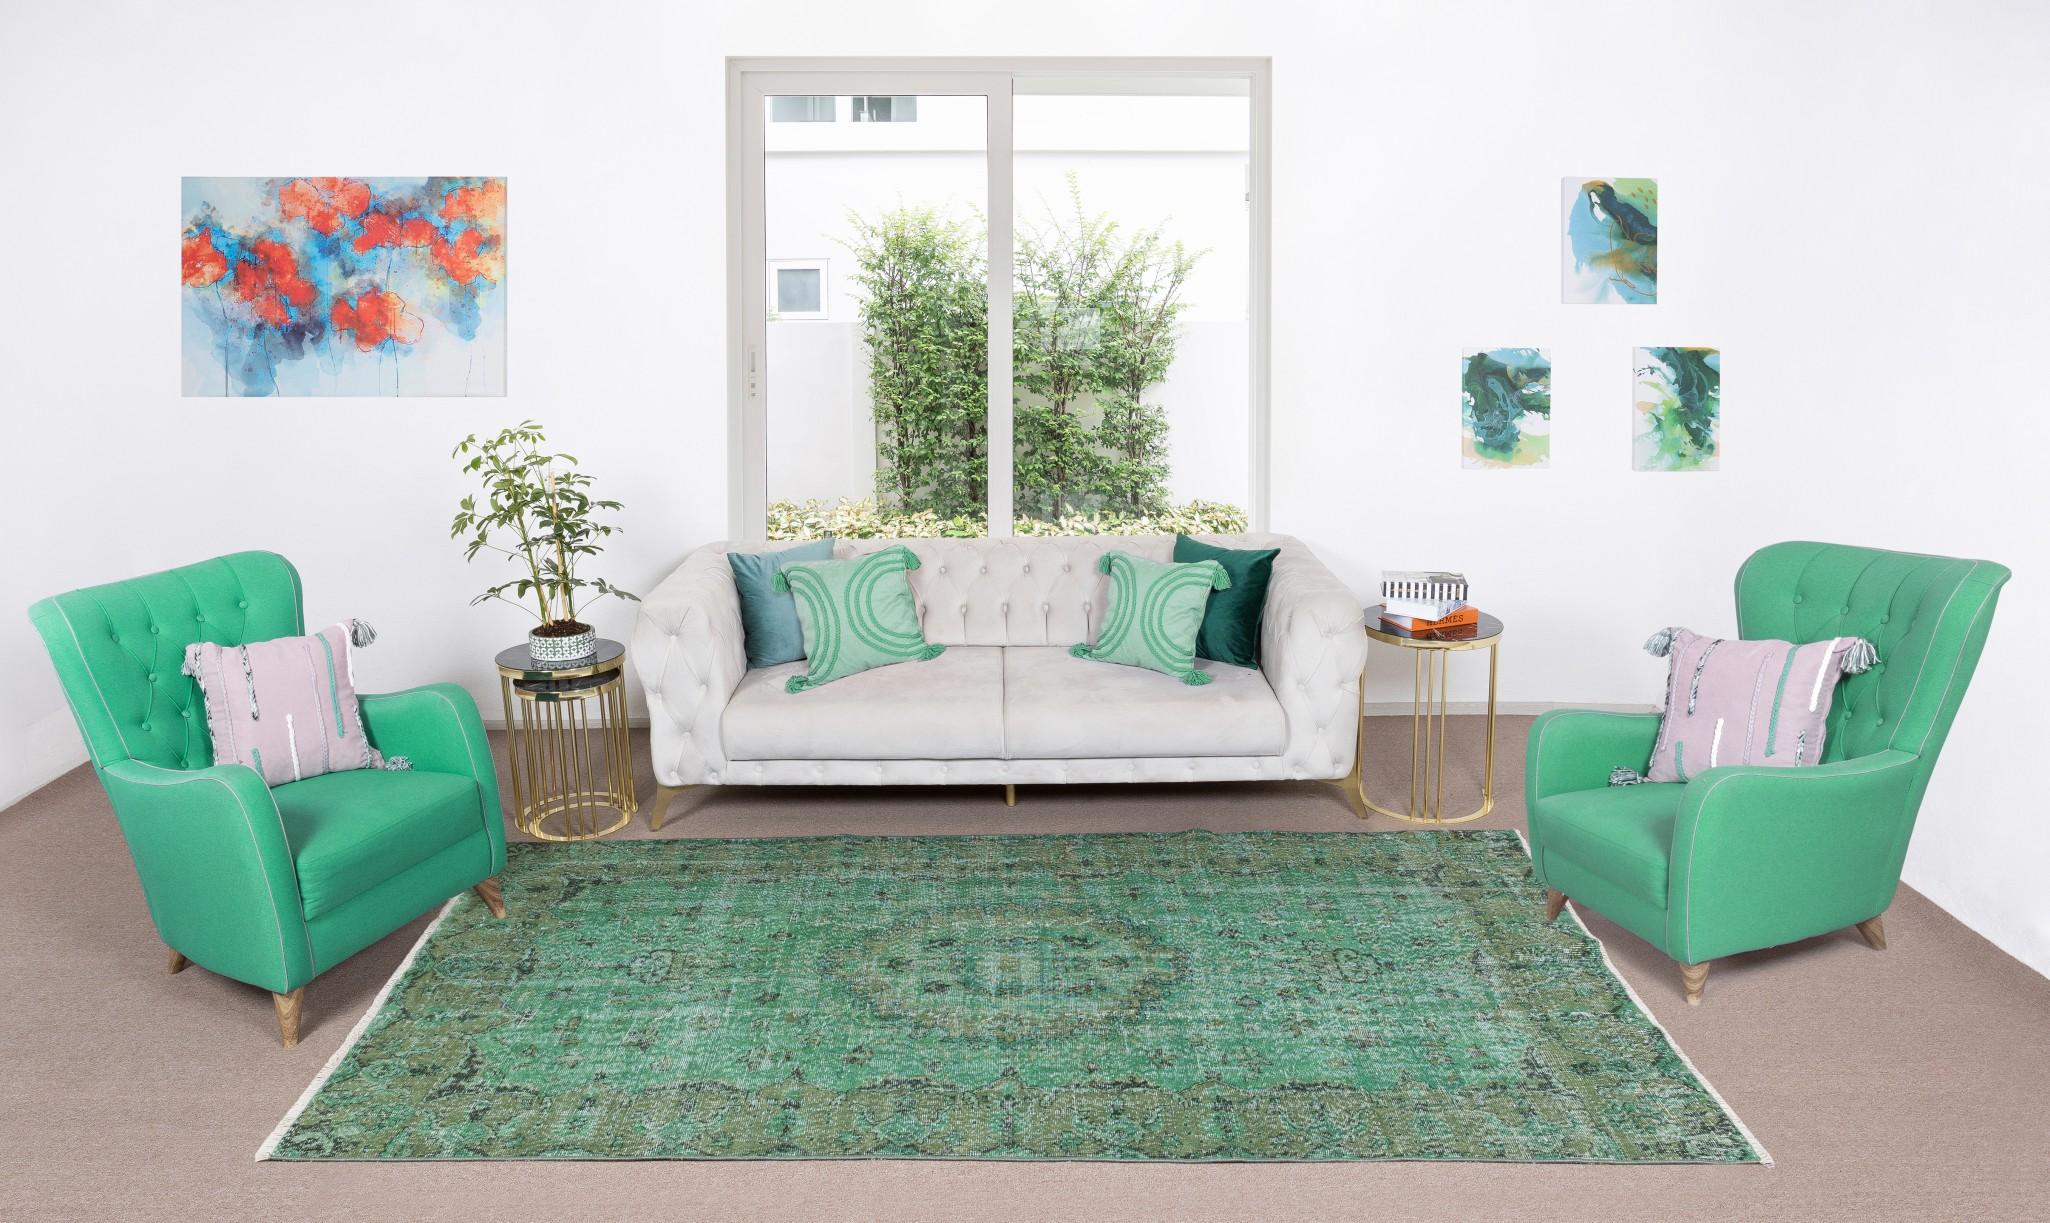 Our over-dyed rugs are all hand-knotted vintage pieces that are recreated in our workshop to cater to a wider range of interior design choices from modern to coastal, from industrial to rustic/cottage. These 50 to 70 year-old rugs were hand-knotted